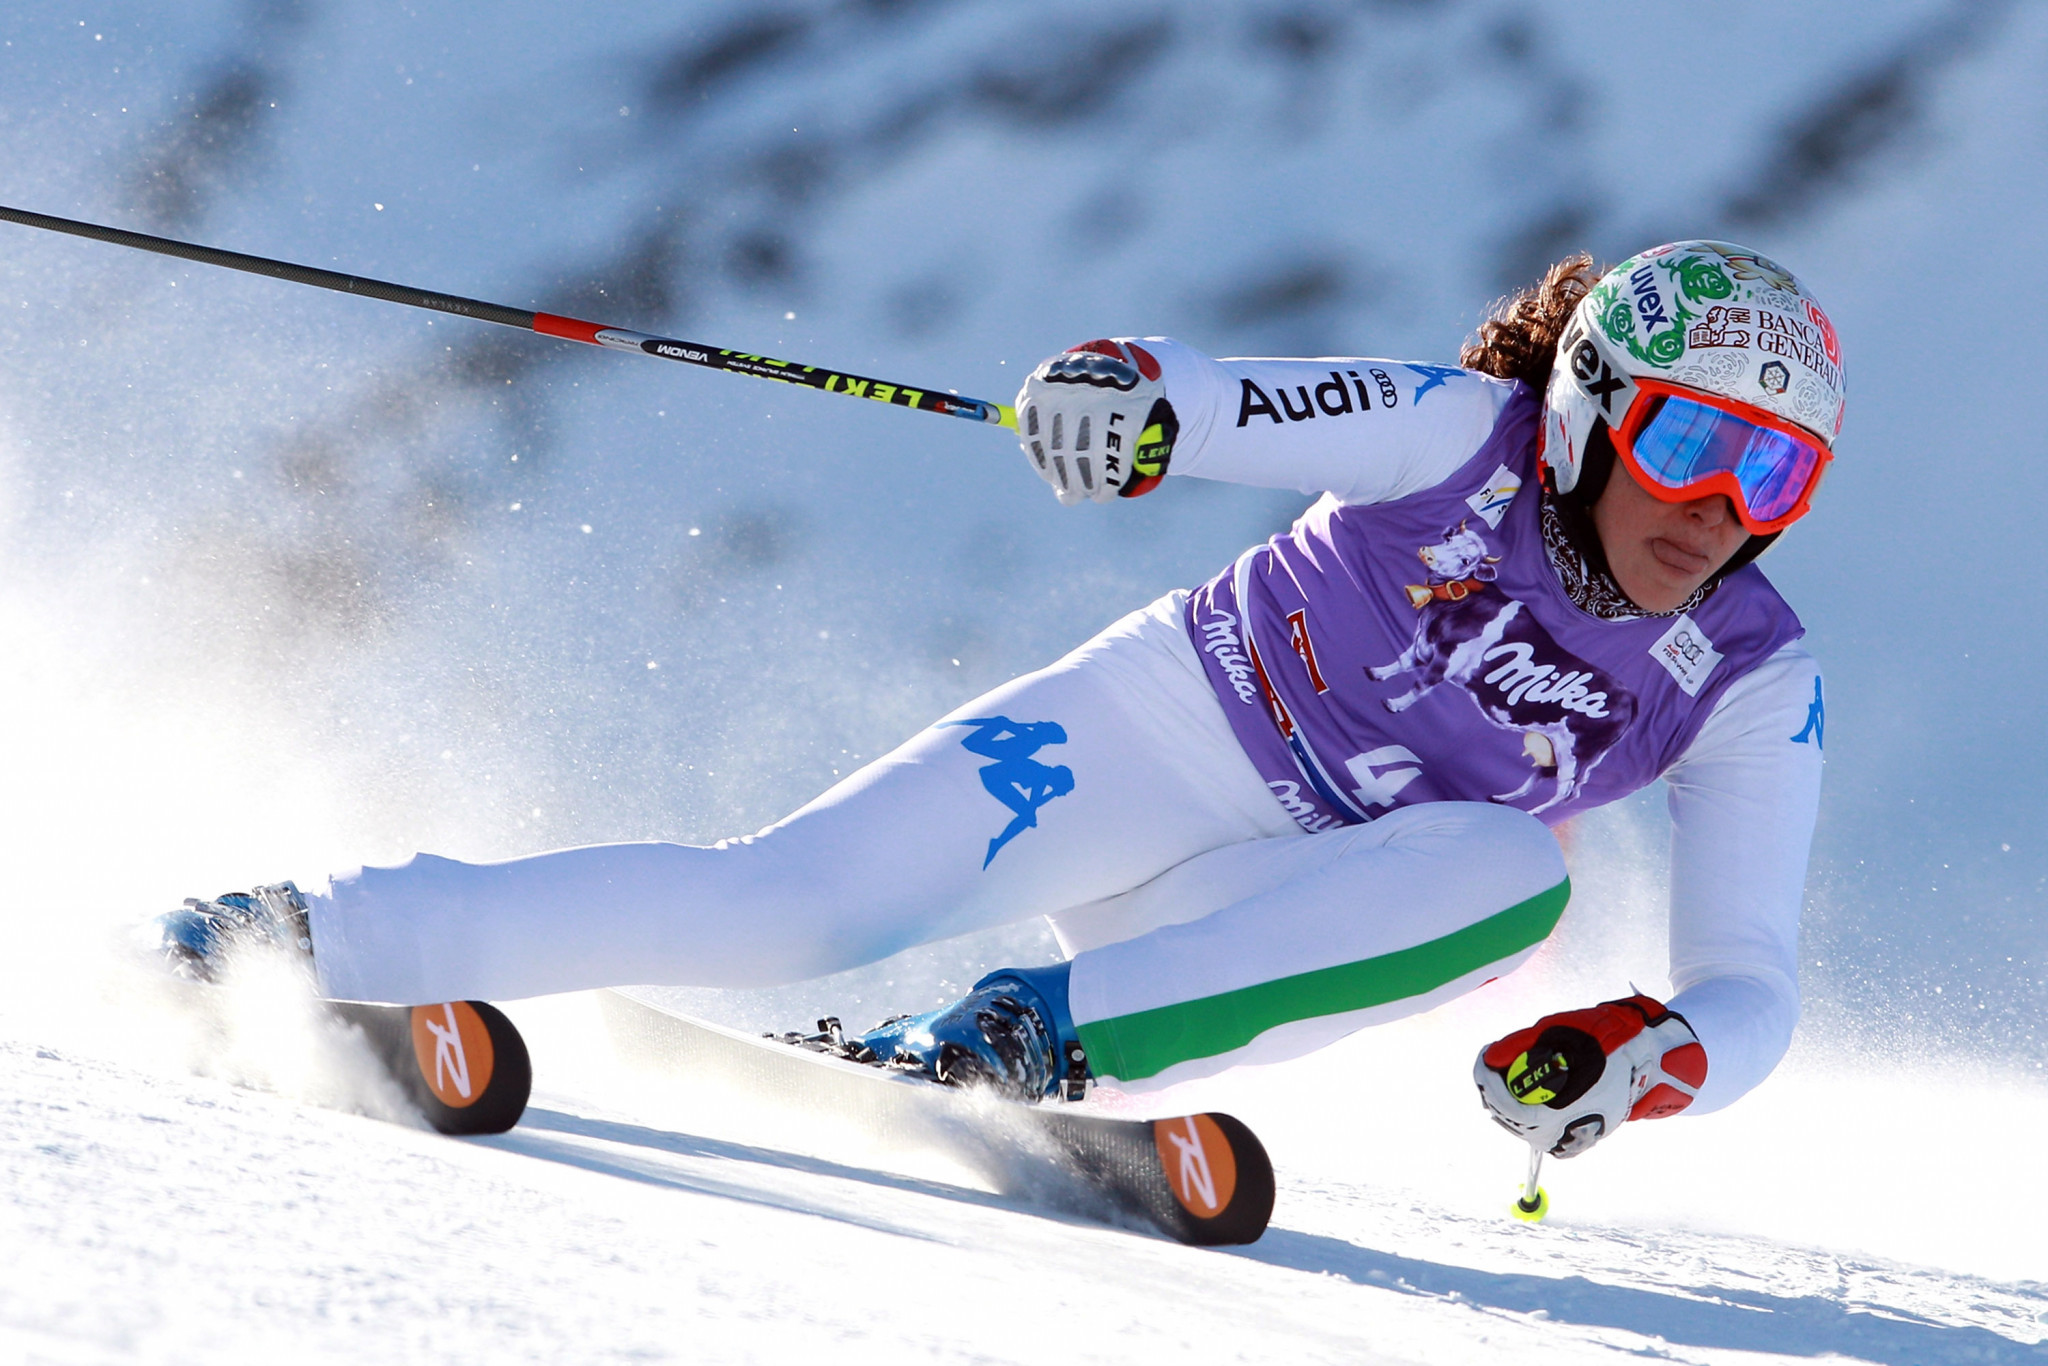 FIS Alpine Skiing World Cup continues in Cortina d’Ampezzo and Kitzbuehel